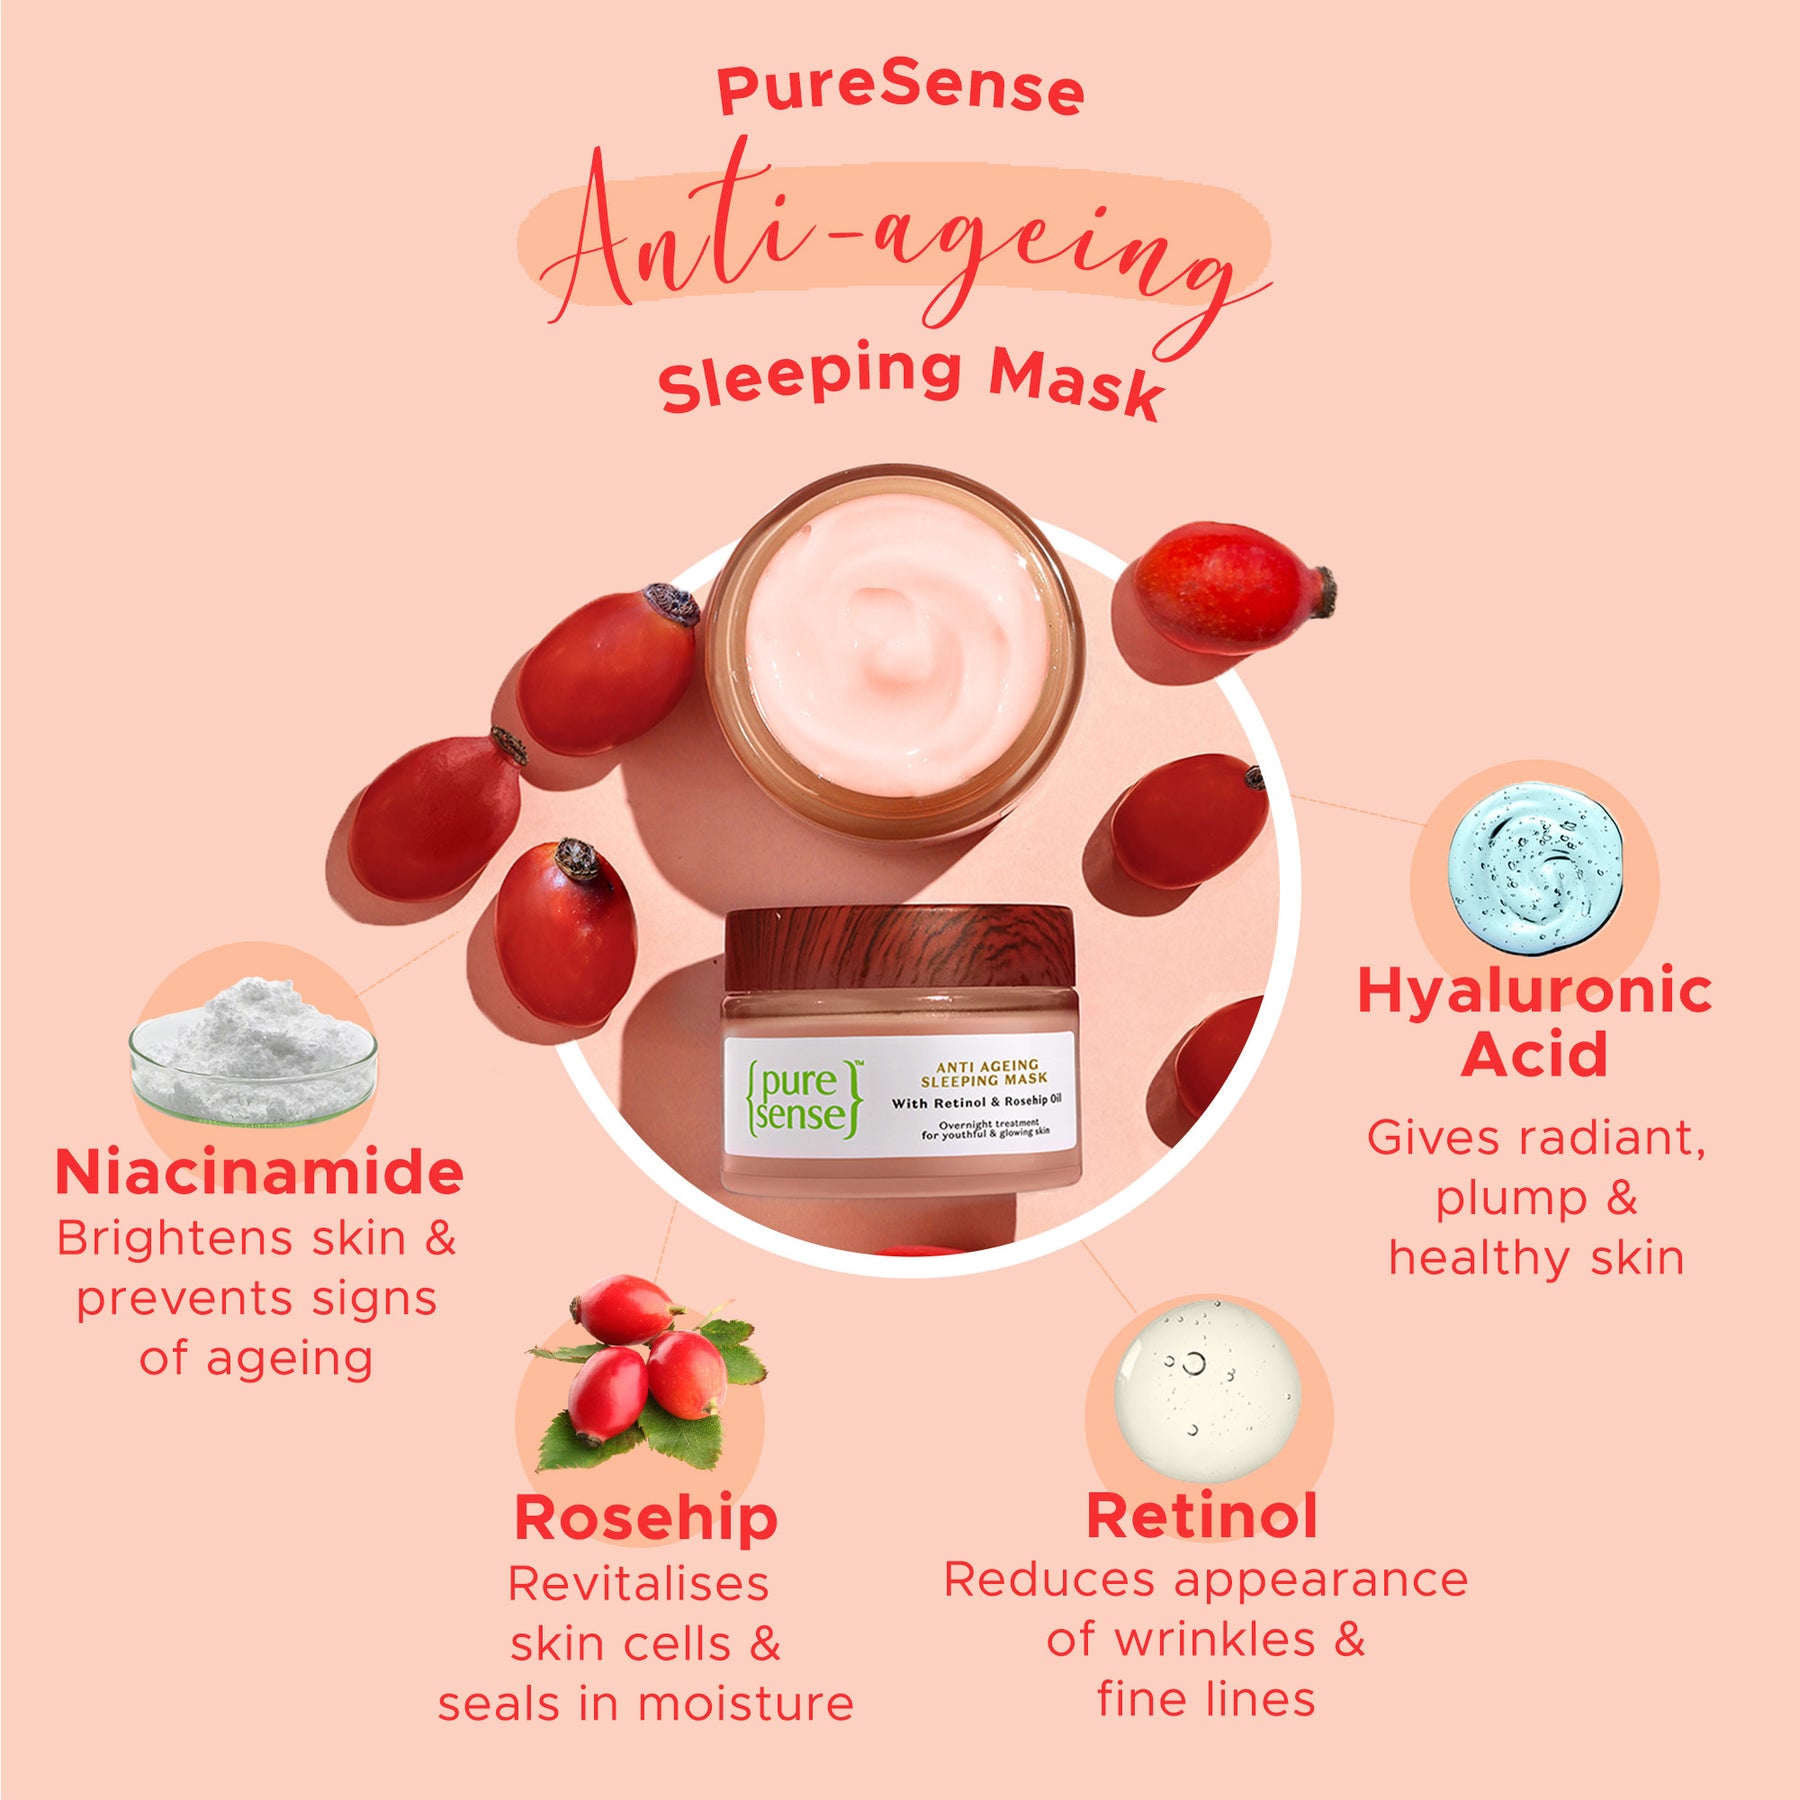 Anti-ageing Sleeping Mask | Paraben & Sulphate Free |  From the makers of Parachute Advansed | 50gm